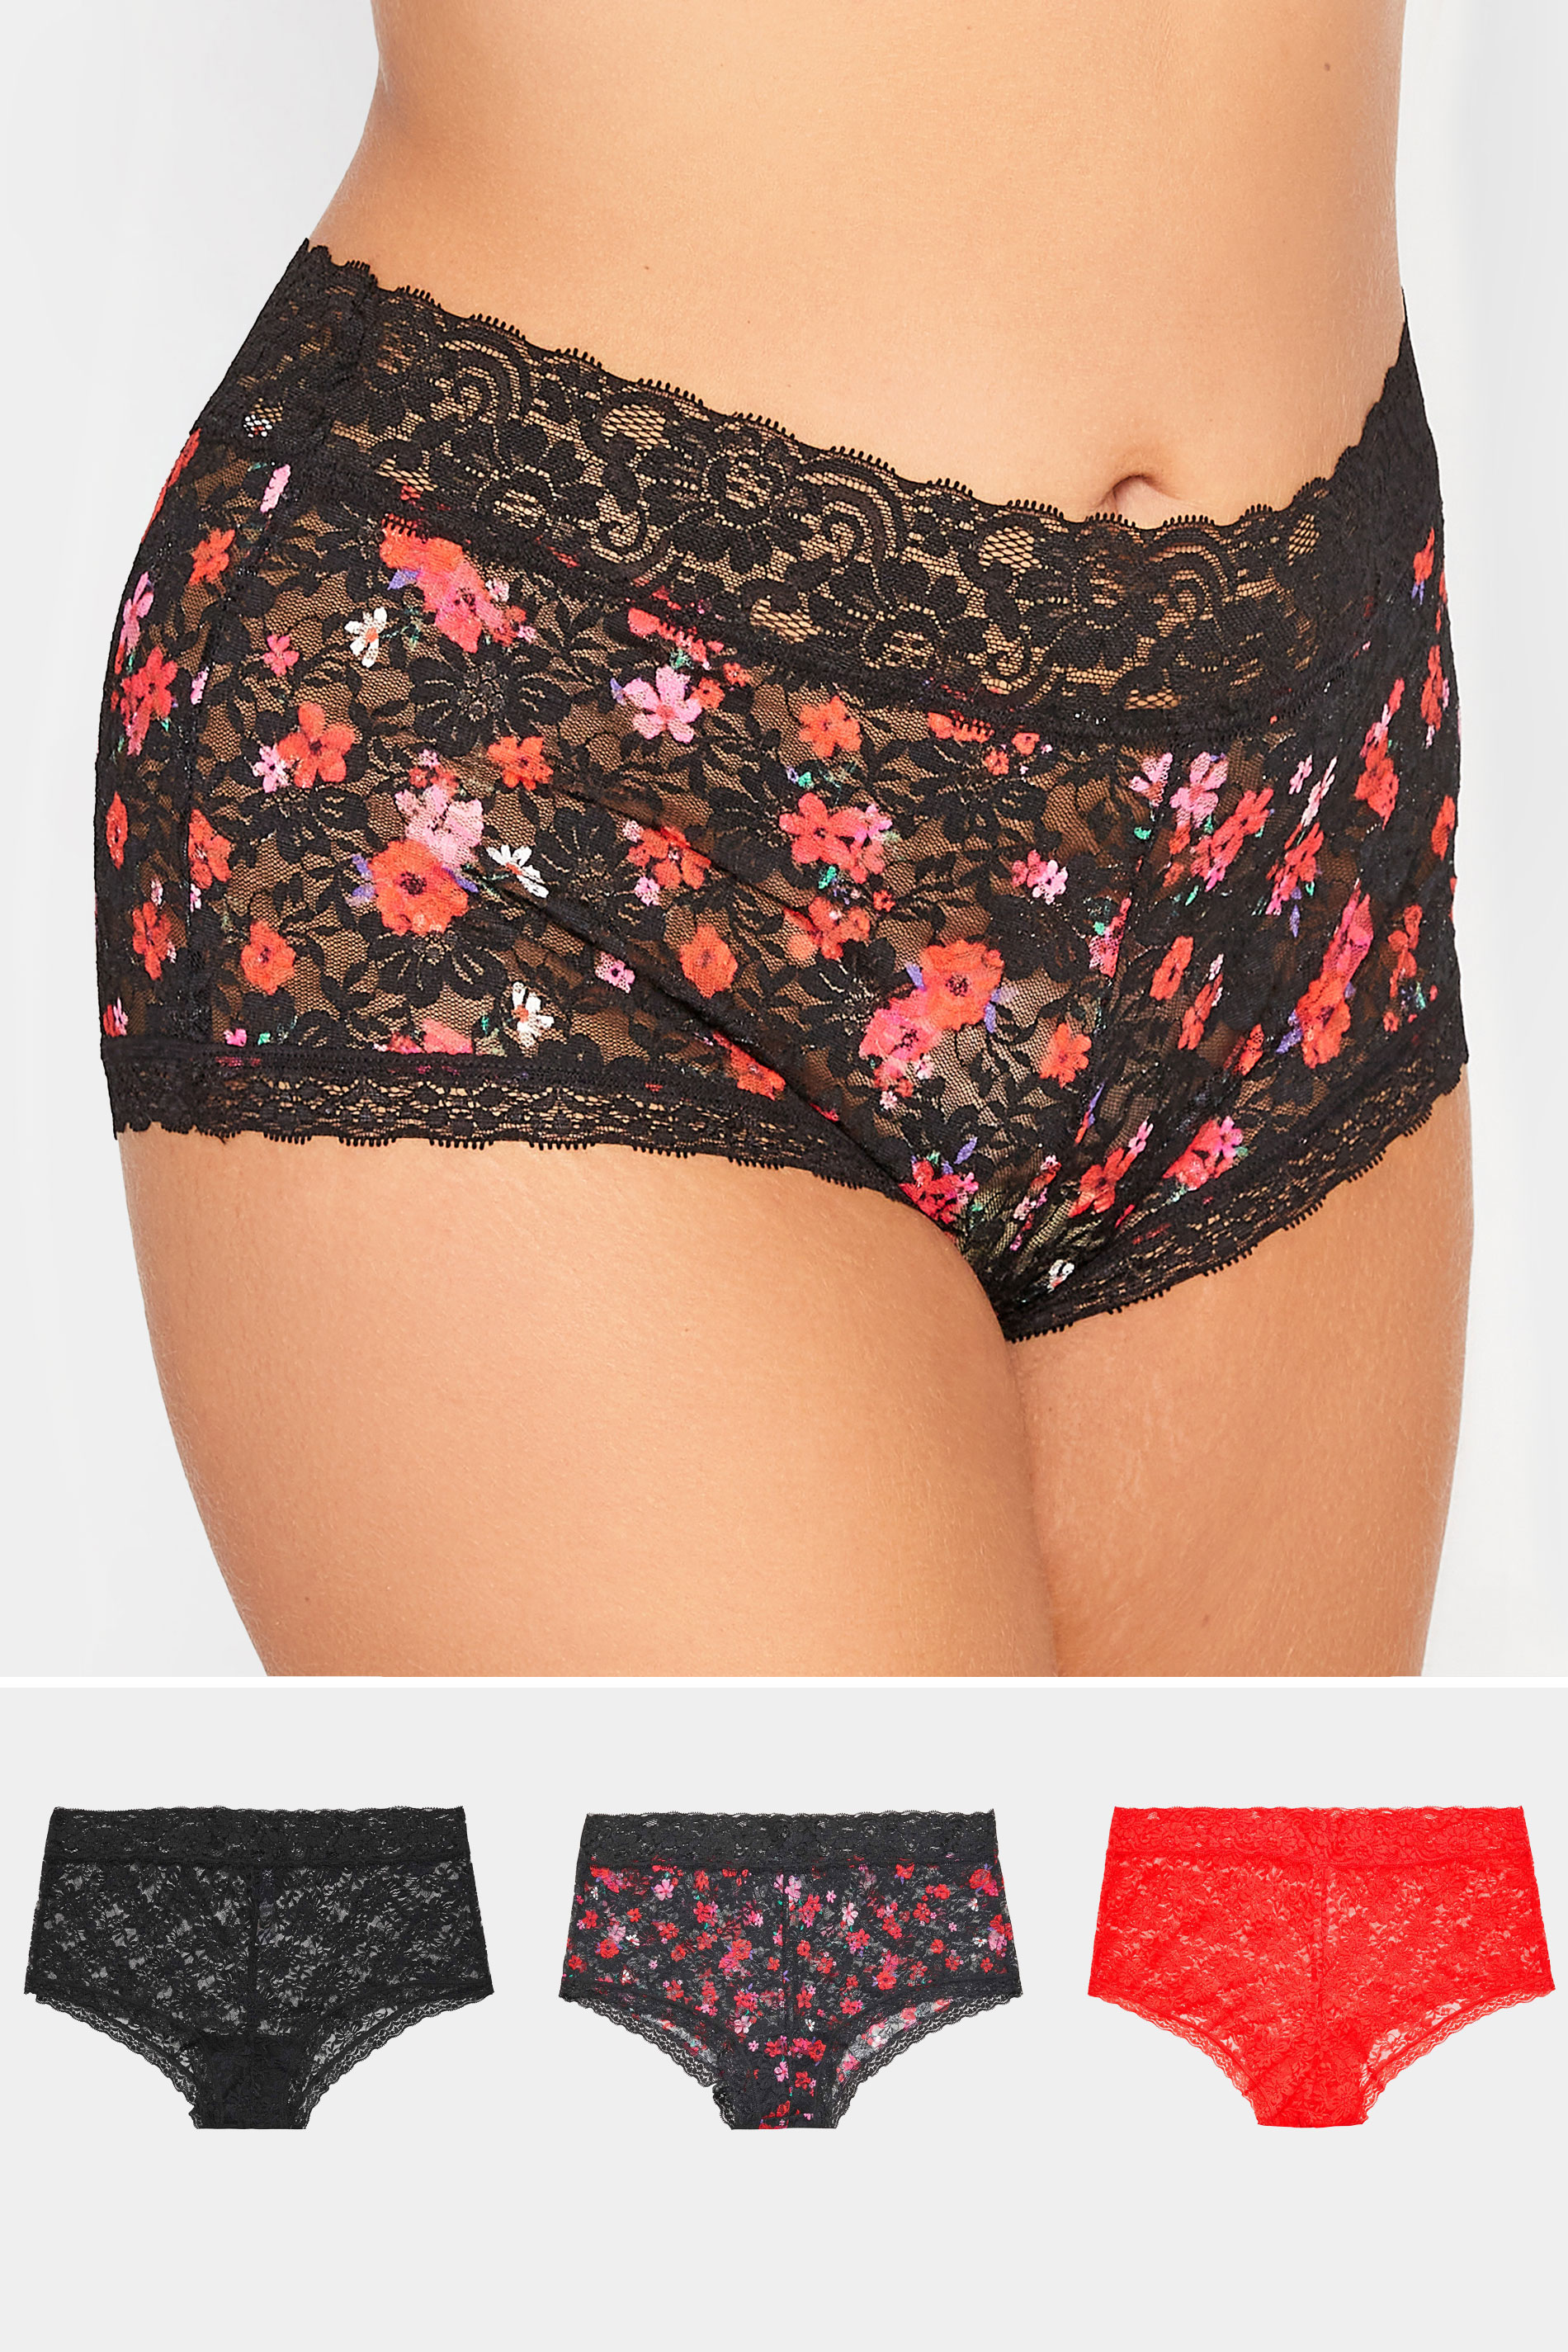 Plus Size 3 PACK Black & Red Floral Lace Shorts | Yours Clothing  1